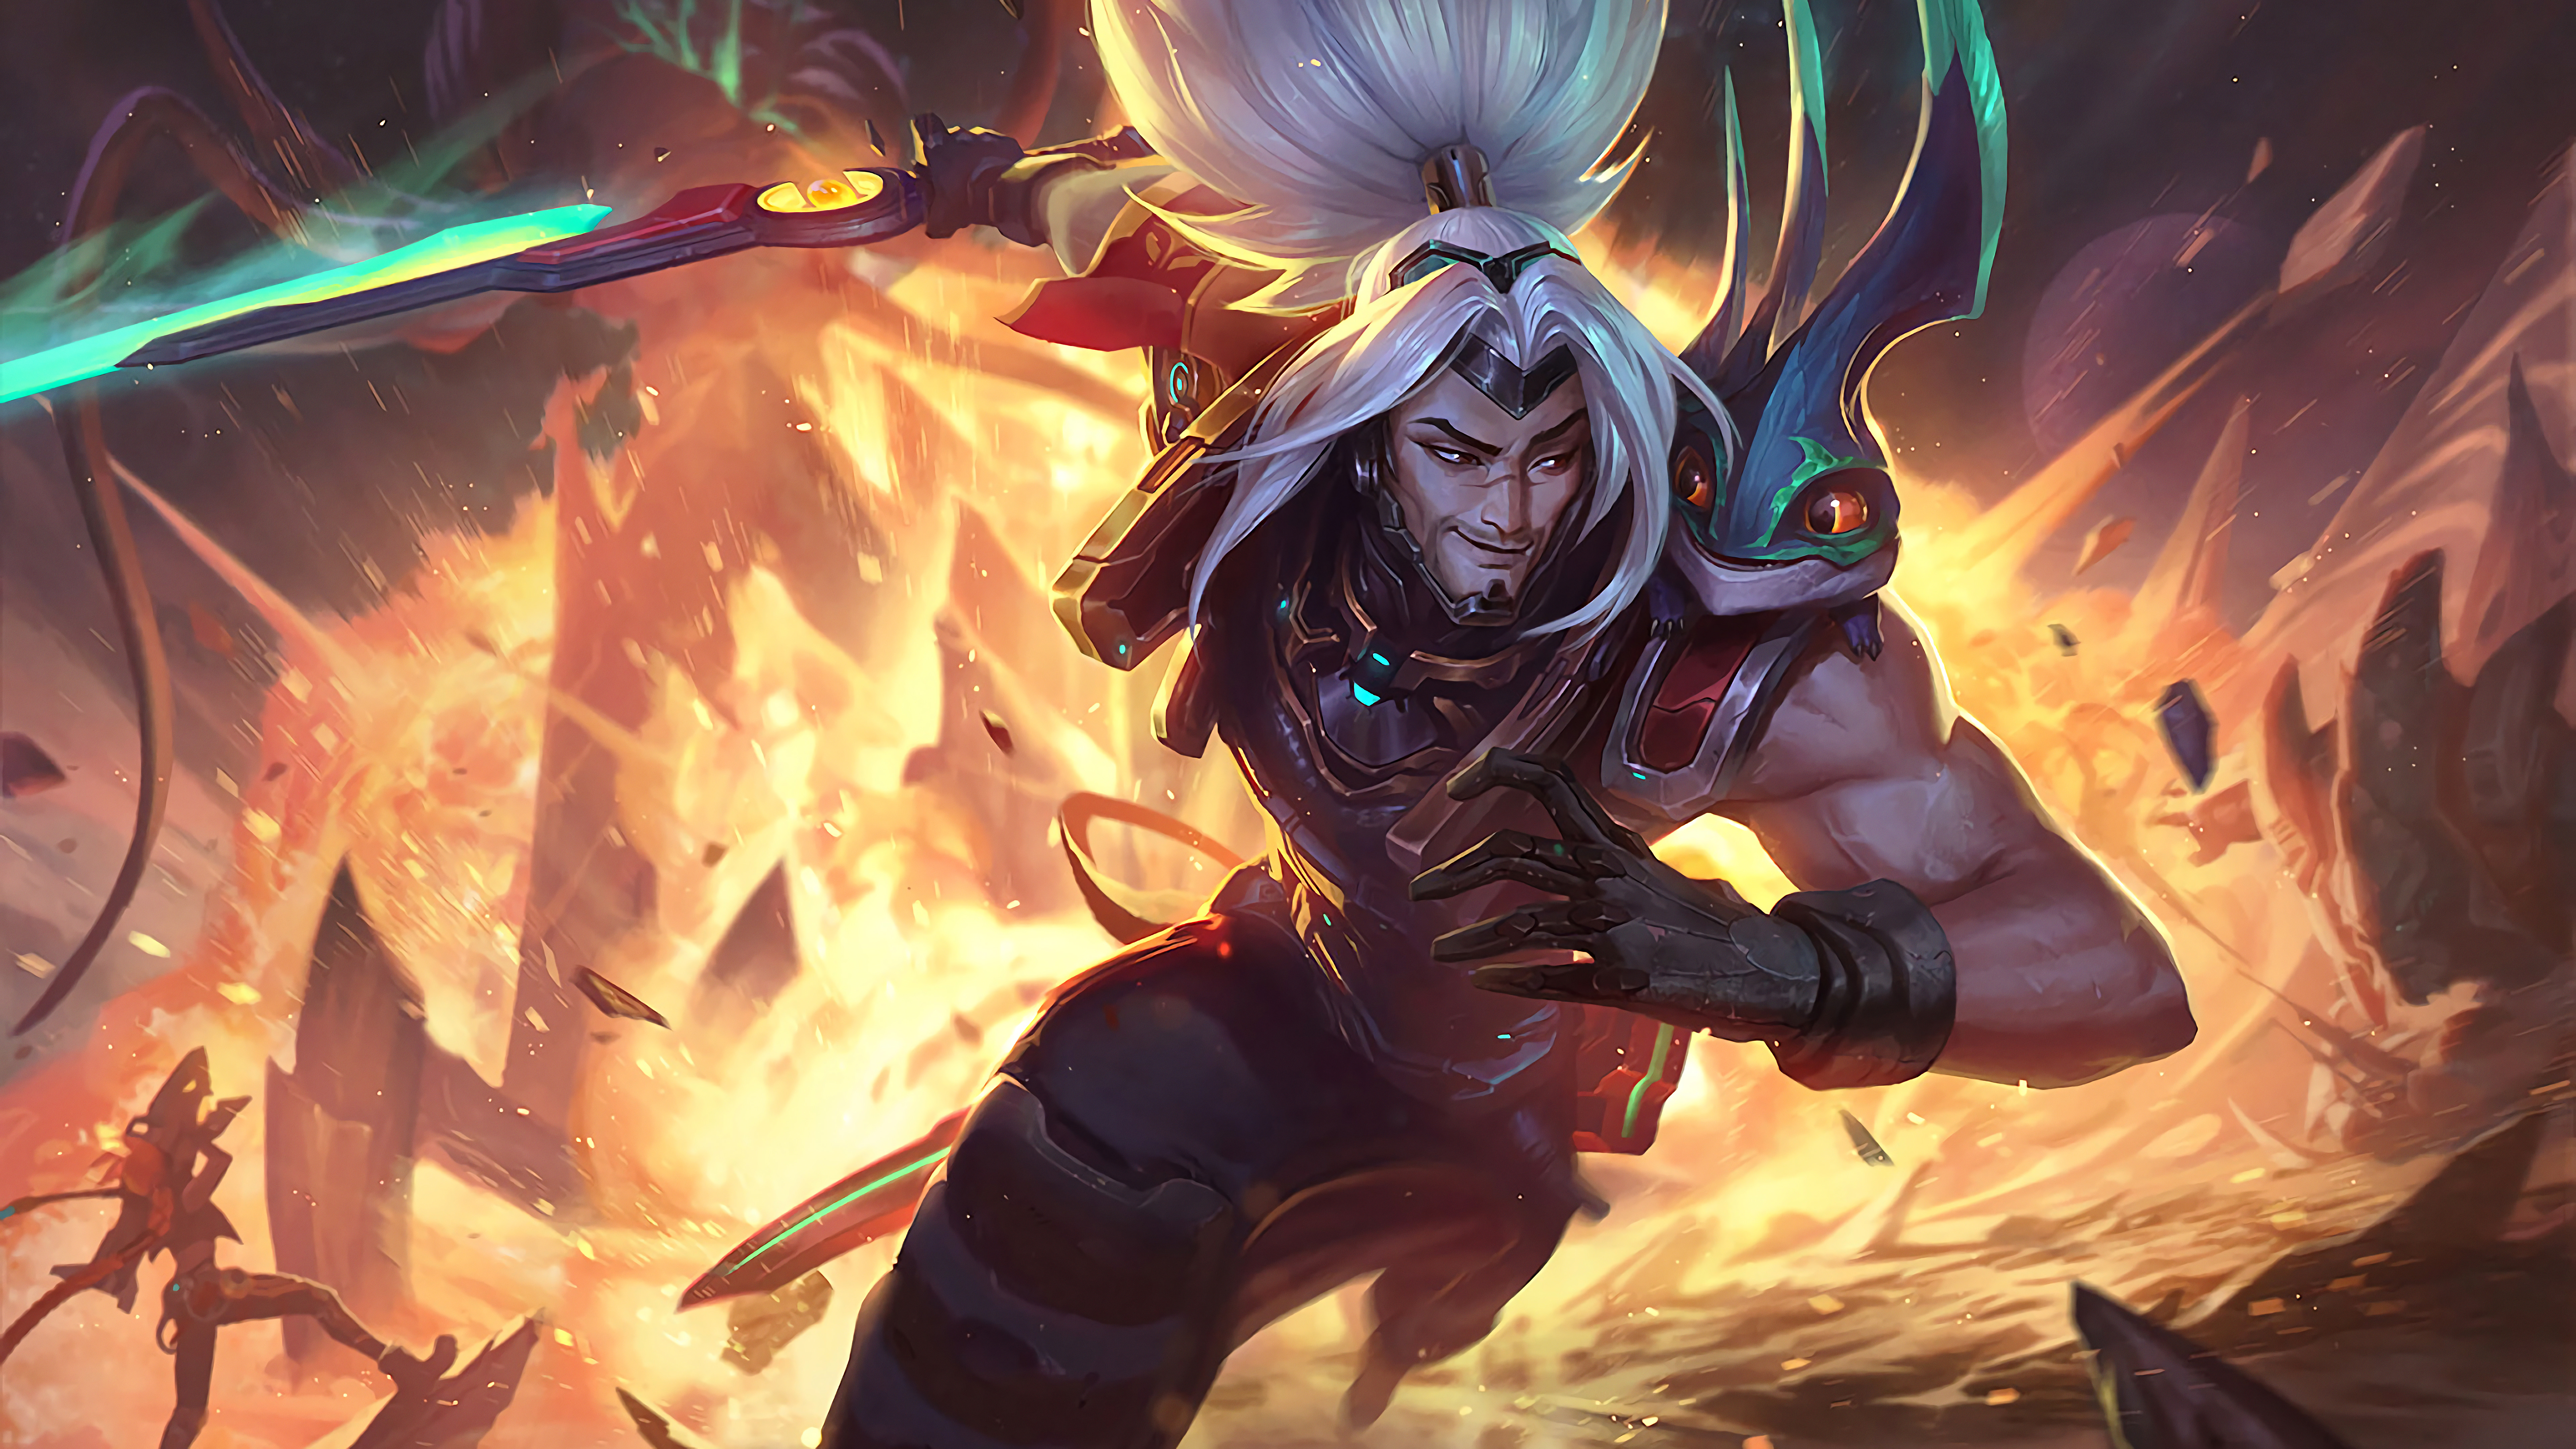 General 7680x4320 League of Legends Yasuo (League of Legends) men white hair Riot Games video games video game characters